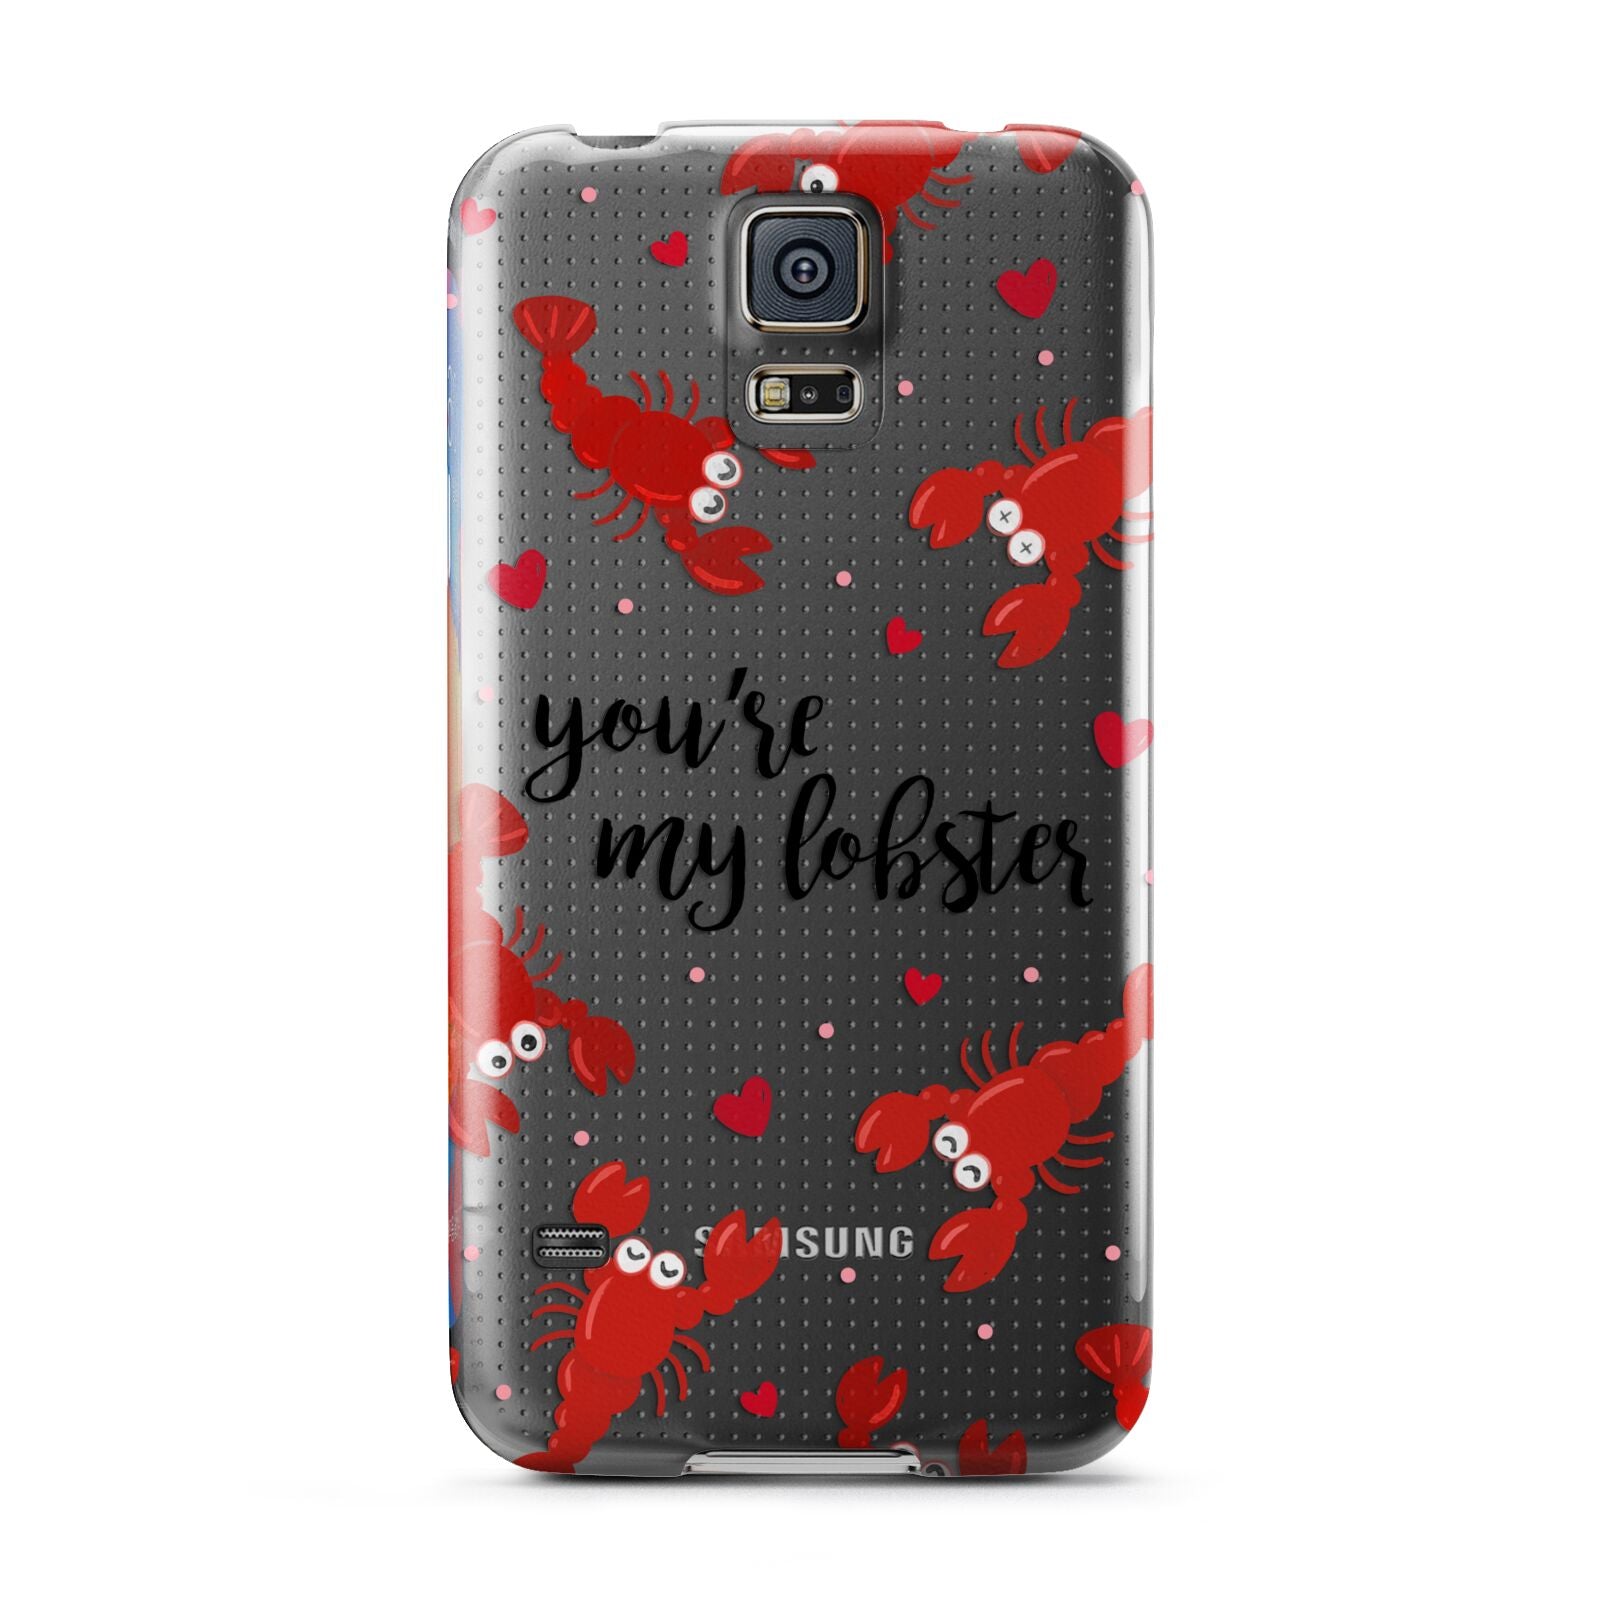 Youre My Lobster Samsung Galaxy S5 Case